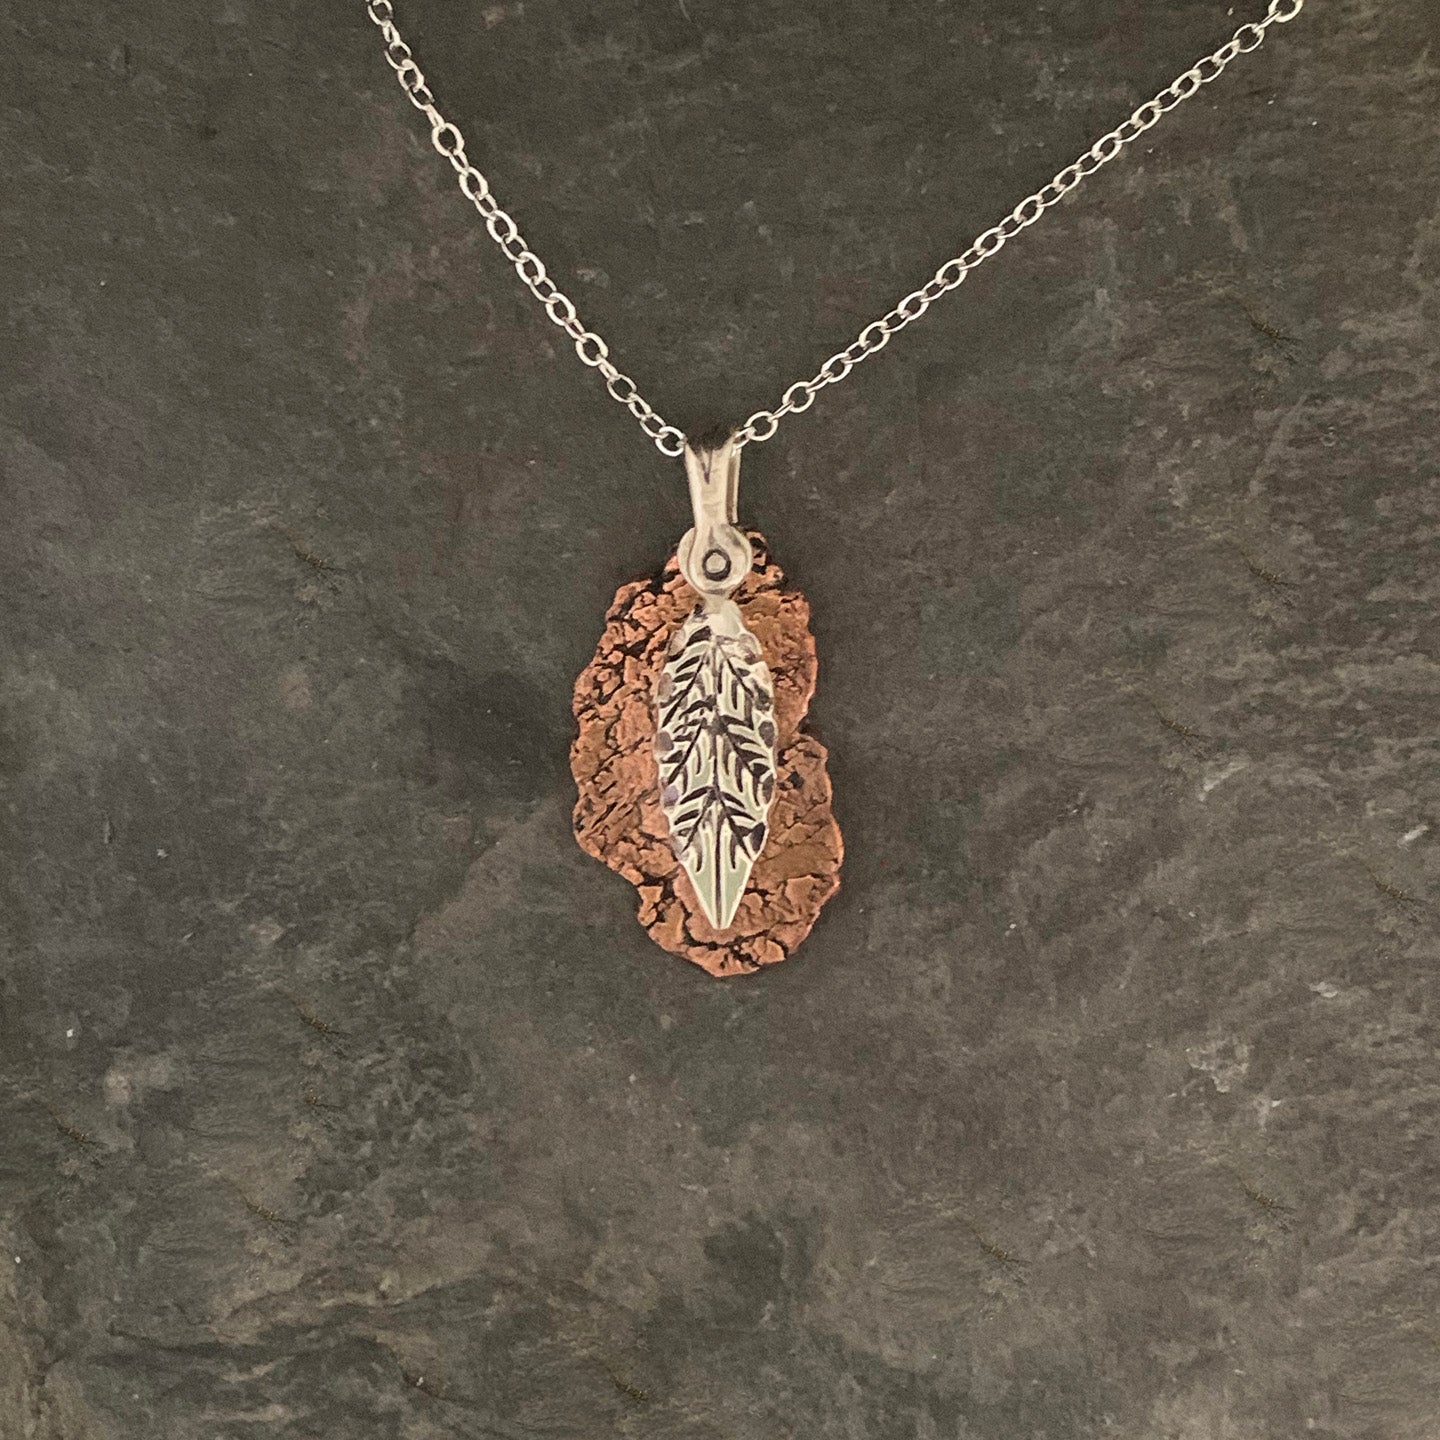 Silver Leaf on Textured Copper Pendant Necklace by Mary Anne Huntington